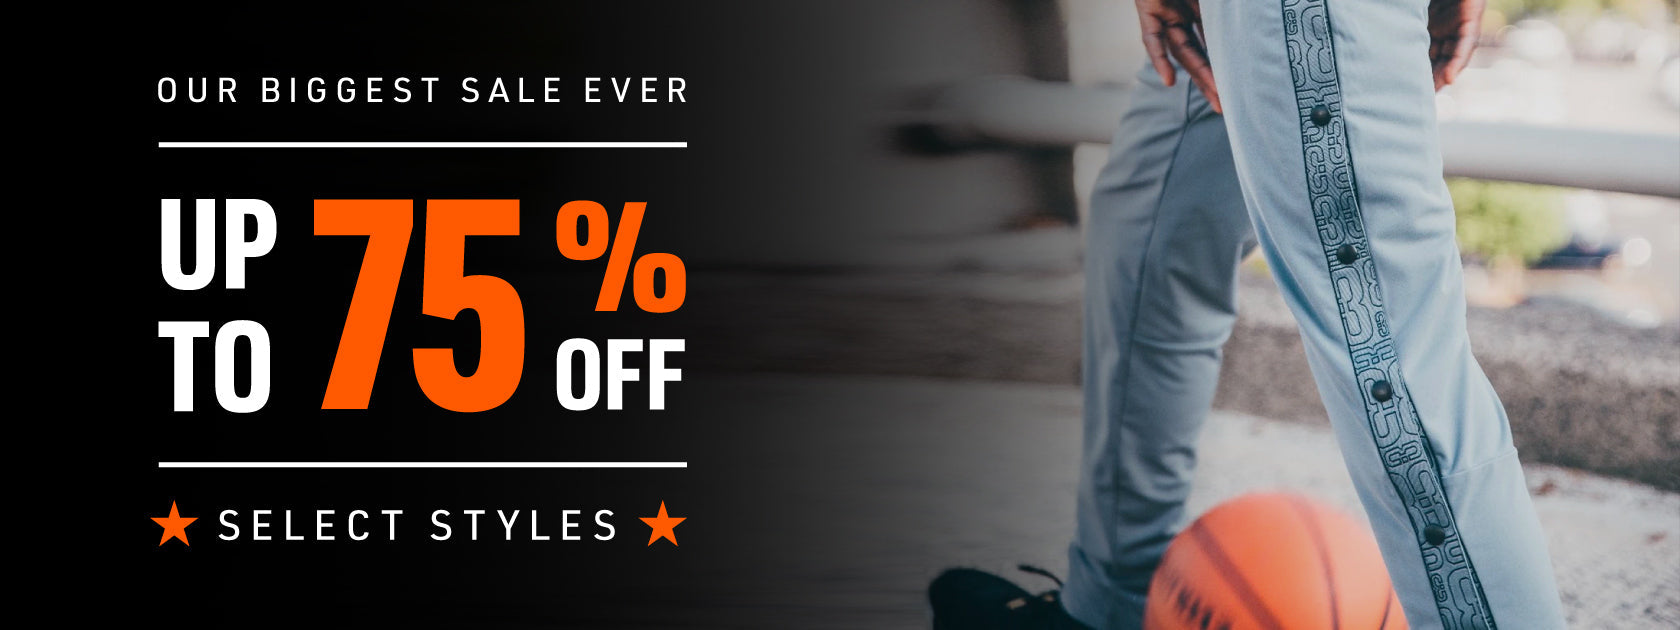 BIGGEST SALE EVER - Up To 75% OFF!